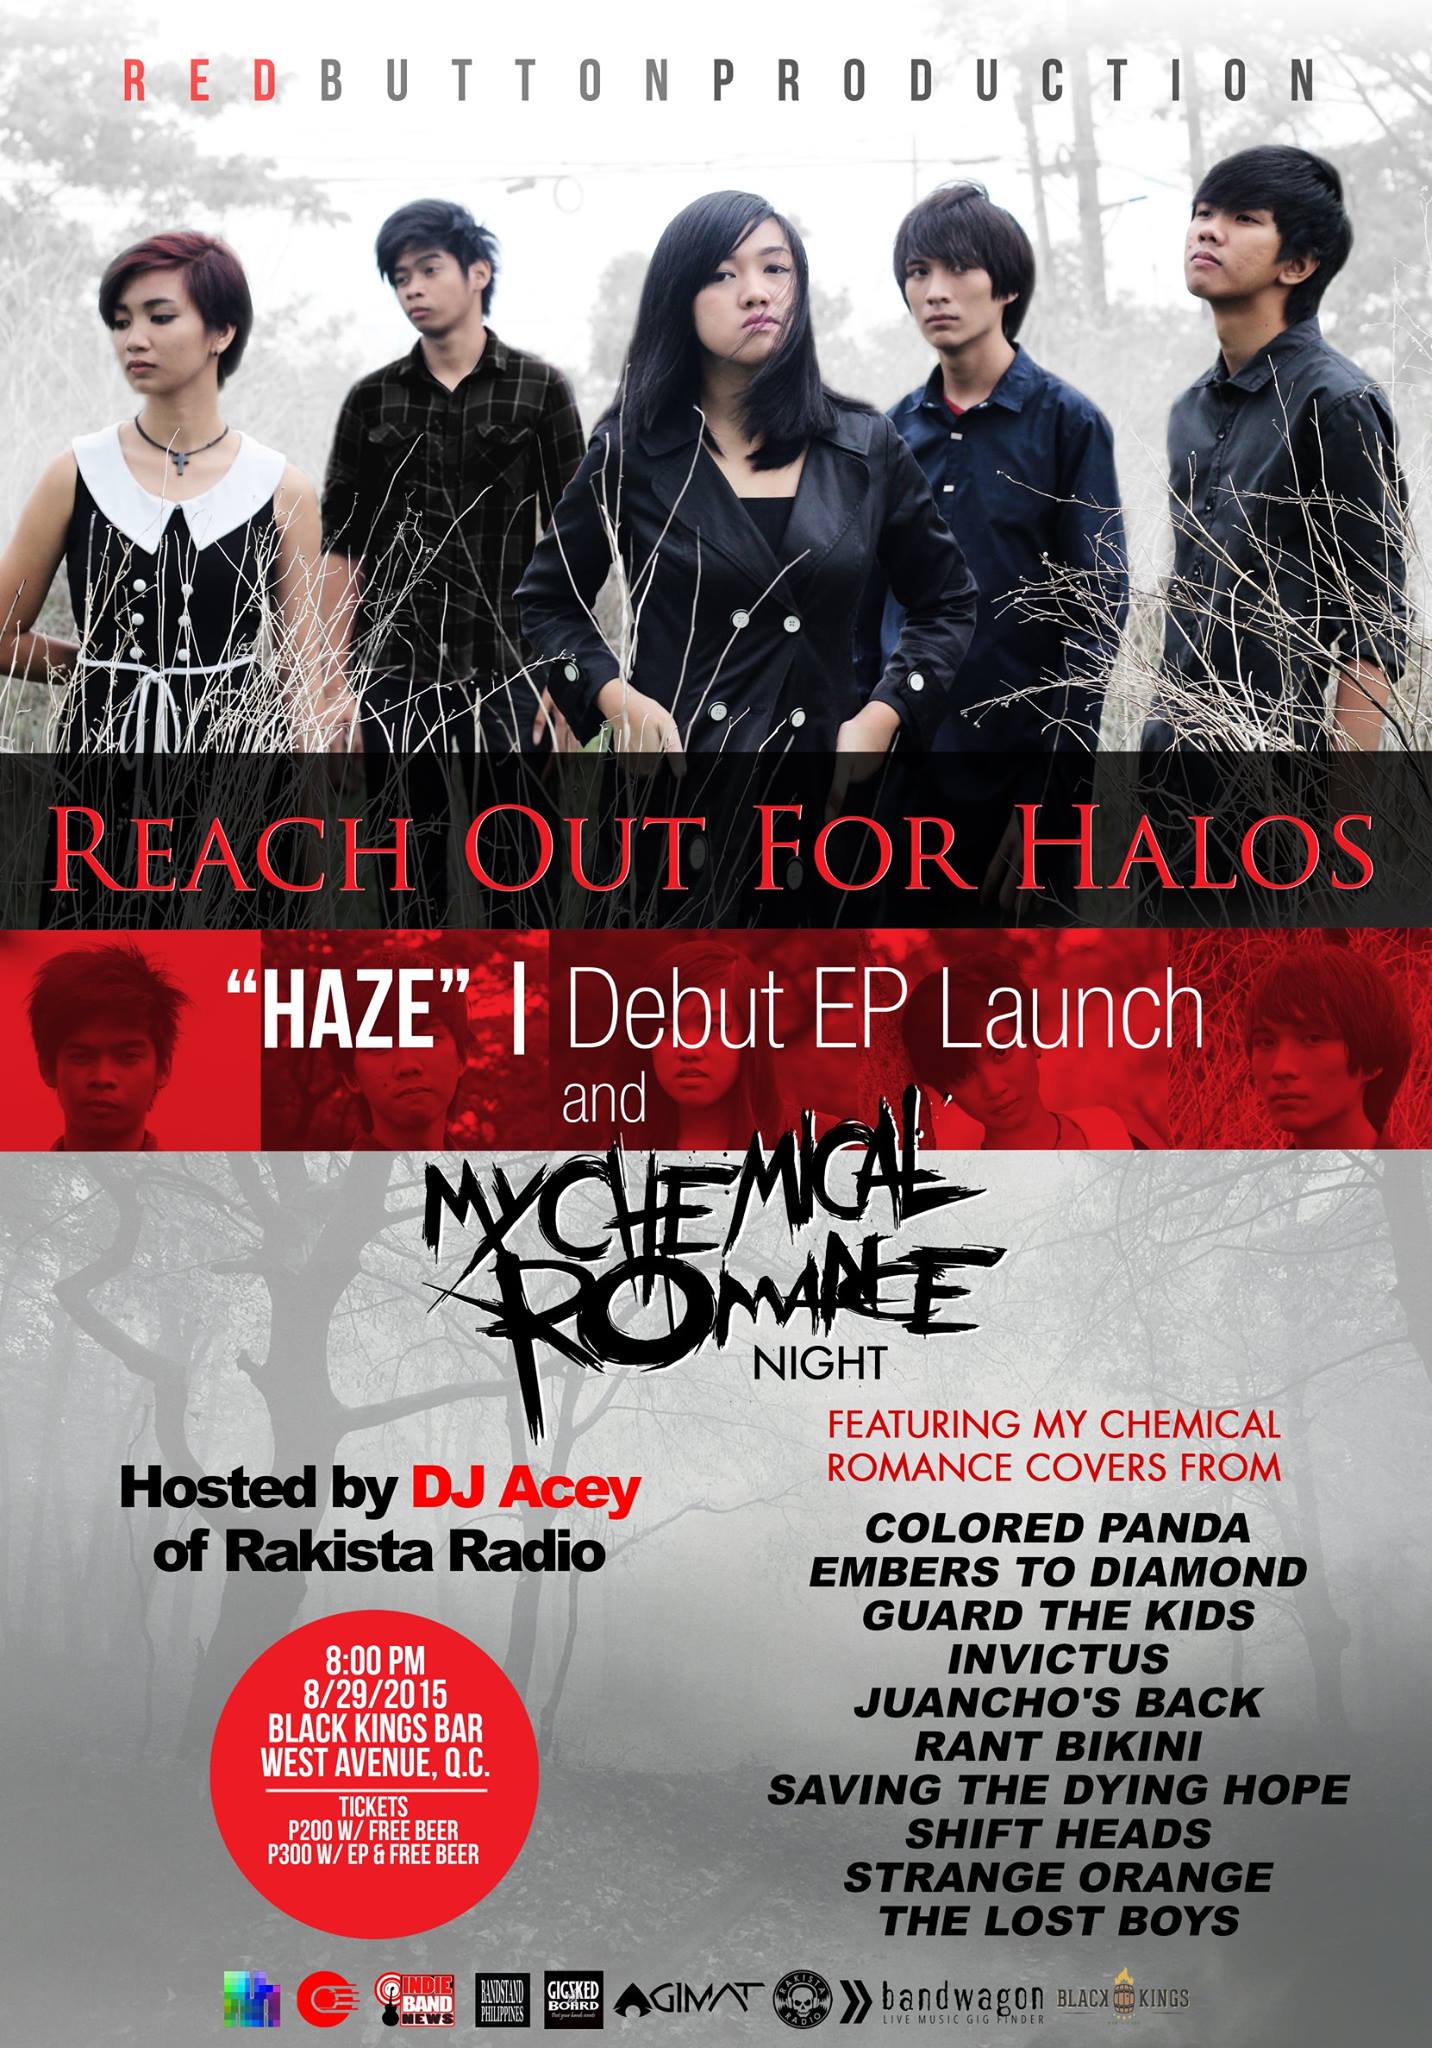 Reach Out For Halos - "HAZE" | Debut EP Launch 	 Saturday, August 29 at 8:00pm Black Kings Bar x Cafe Westlife Building, 107 West Avenue, Quezon City, Philippines Red Button Production Reach Out For Halos "HAZE" | Debut EP Launch and MY CHEMICAL ROMANCE Night Hosted by: DJ ACEY of Rakista Radio FEATURING MY CHEMICAL romance covers from: Colored Panda Embers To Diamond Guard The Kids Invictus Juancho's Back Rant Bikini Saving The Dying Hope Shift Heads Strange Orange The Lost Boys 8/29/2015 | Saturday | 8:00PM at Black Kings Bar, West Ave, Q.C. Tickets: P200 w/ free BEER P300 w/ EP & free BEER